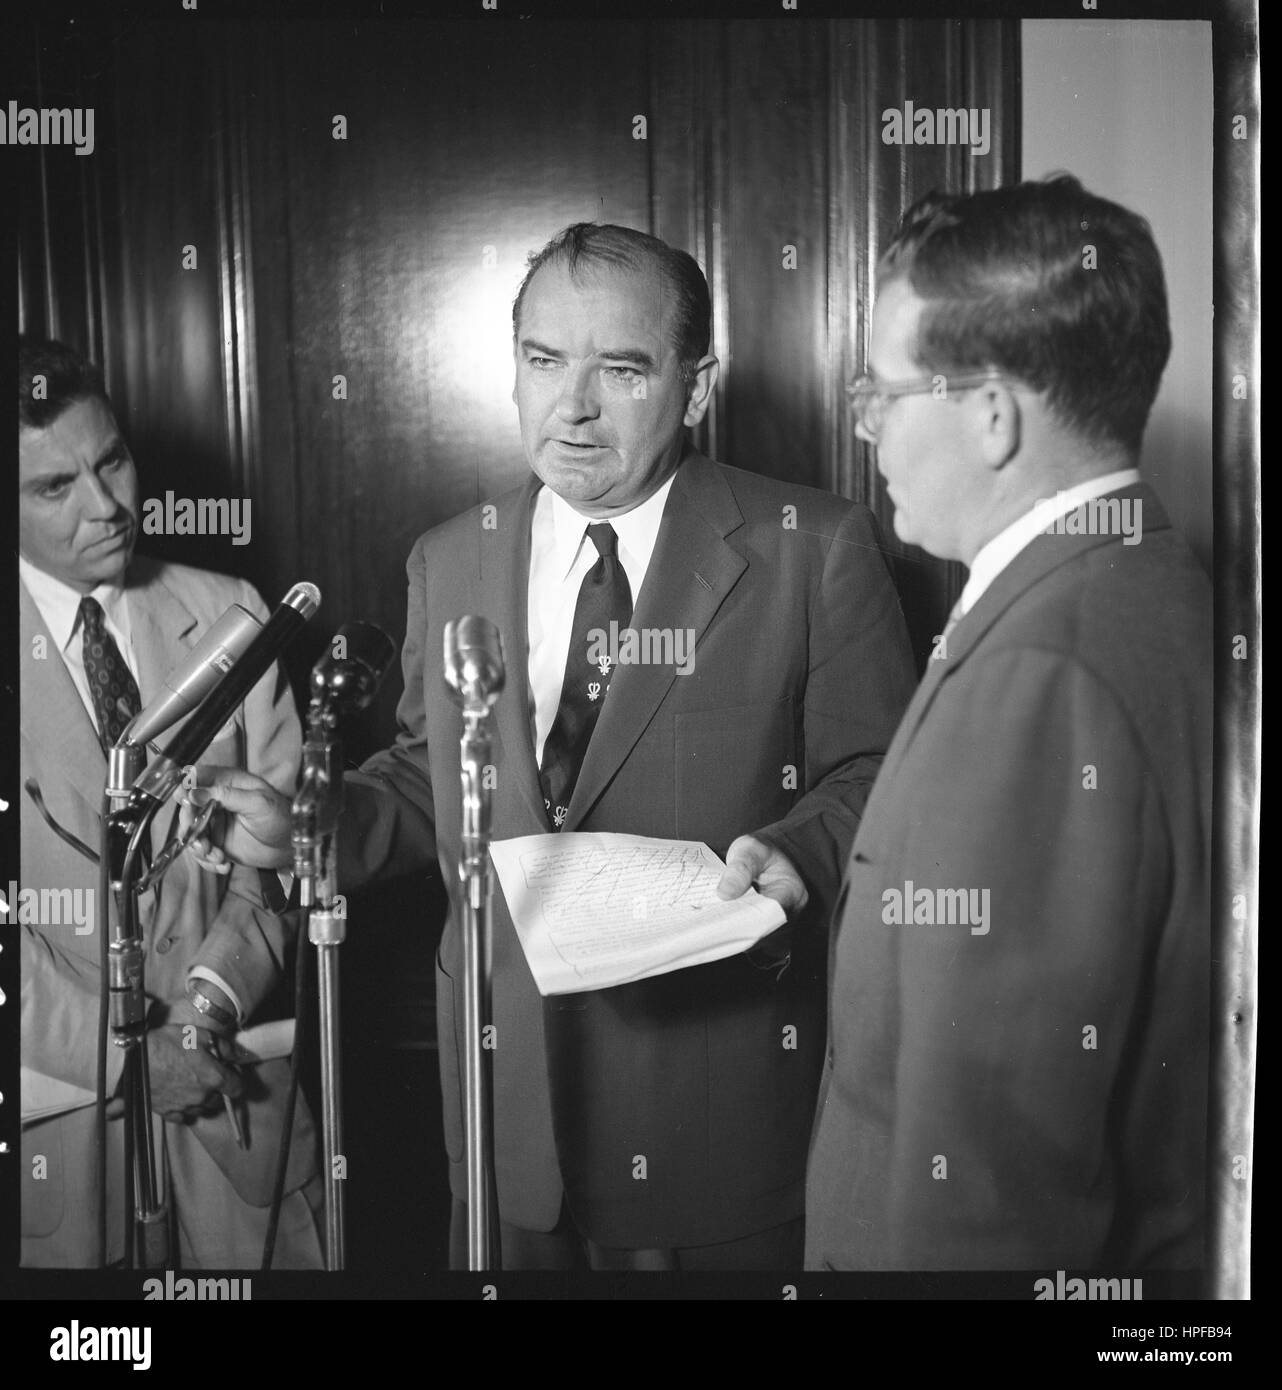 Senator Joseph McCarthy standing at microphone with two other men at the U S Capitol, Washington, DC, 06/01/1954. Photo by Thomas O'Halloran Stock Photo